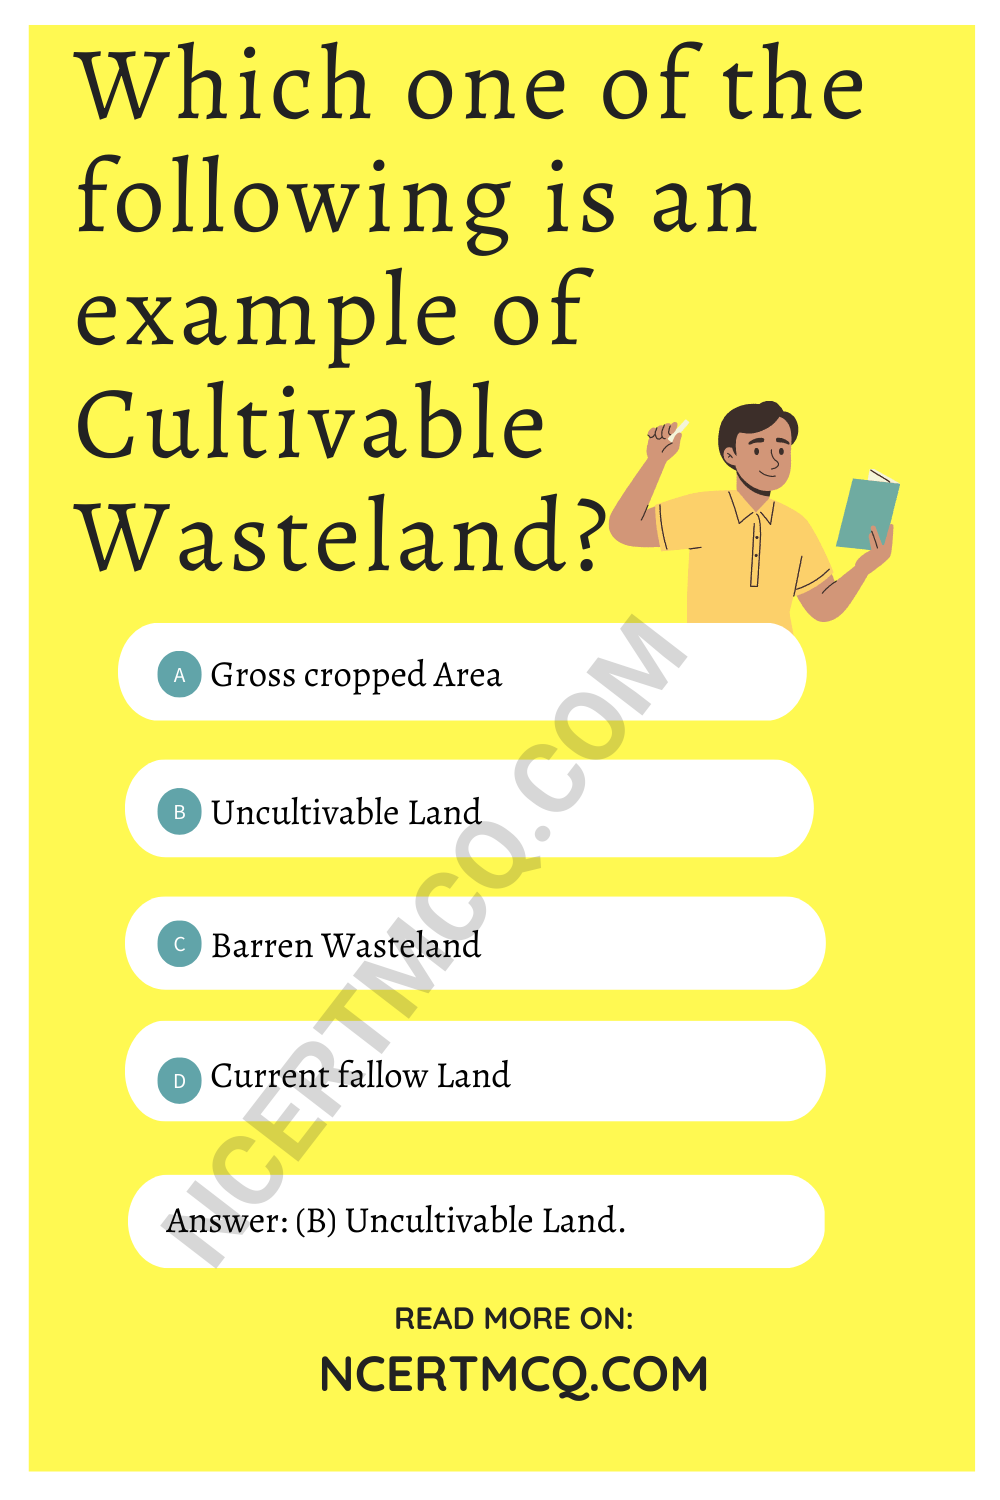 Which one of the following is an example of Cultivable Wasteland?